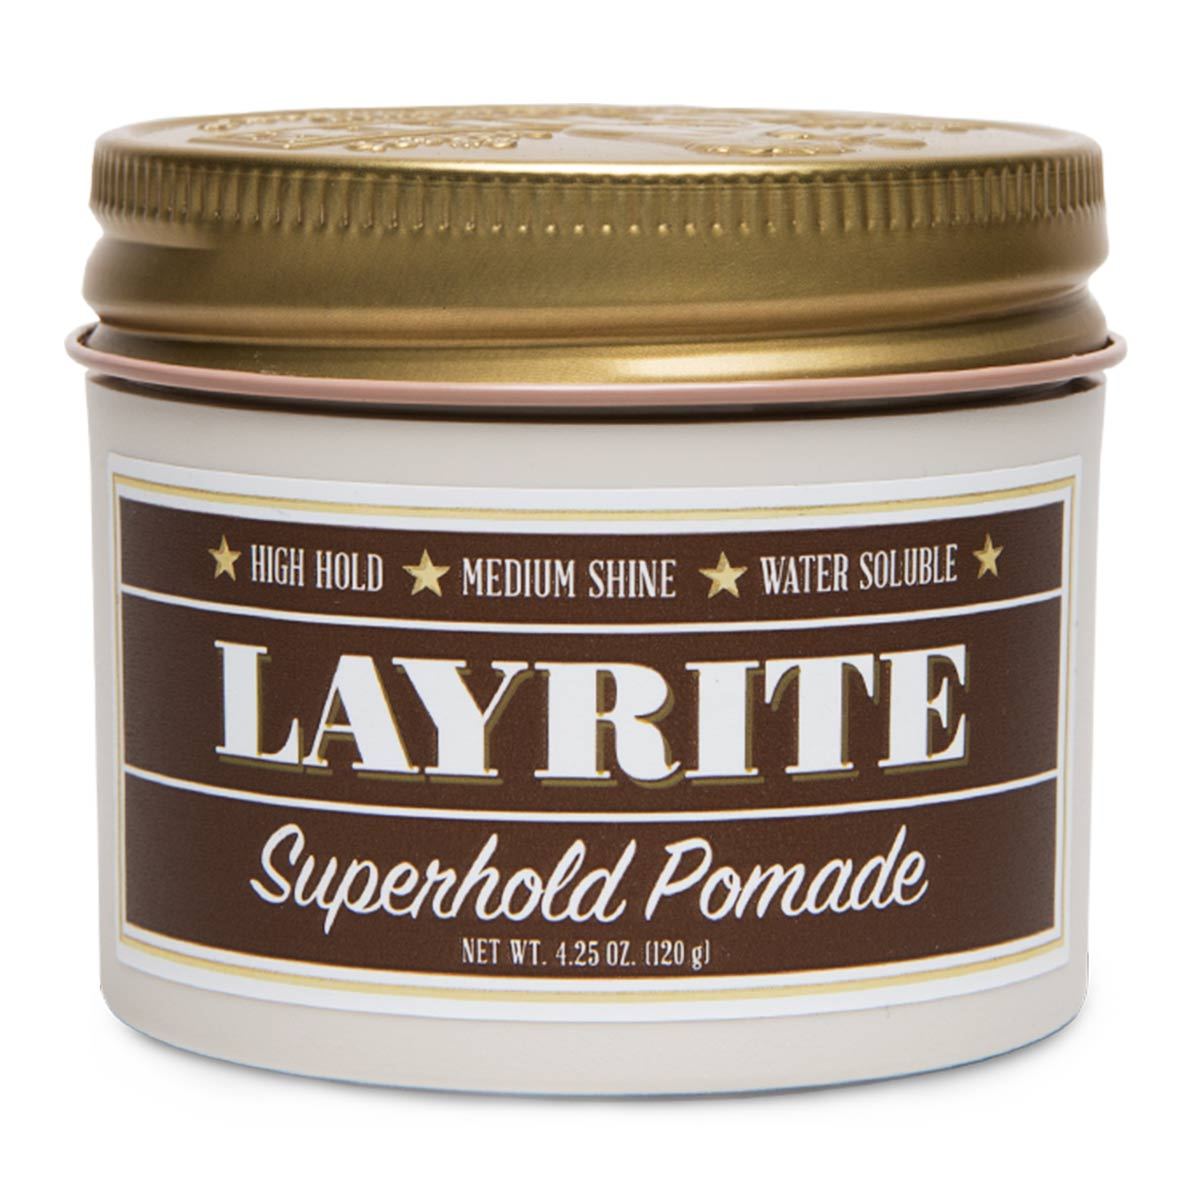 Primary image of Super Hold Pomade